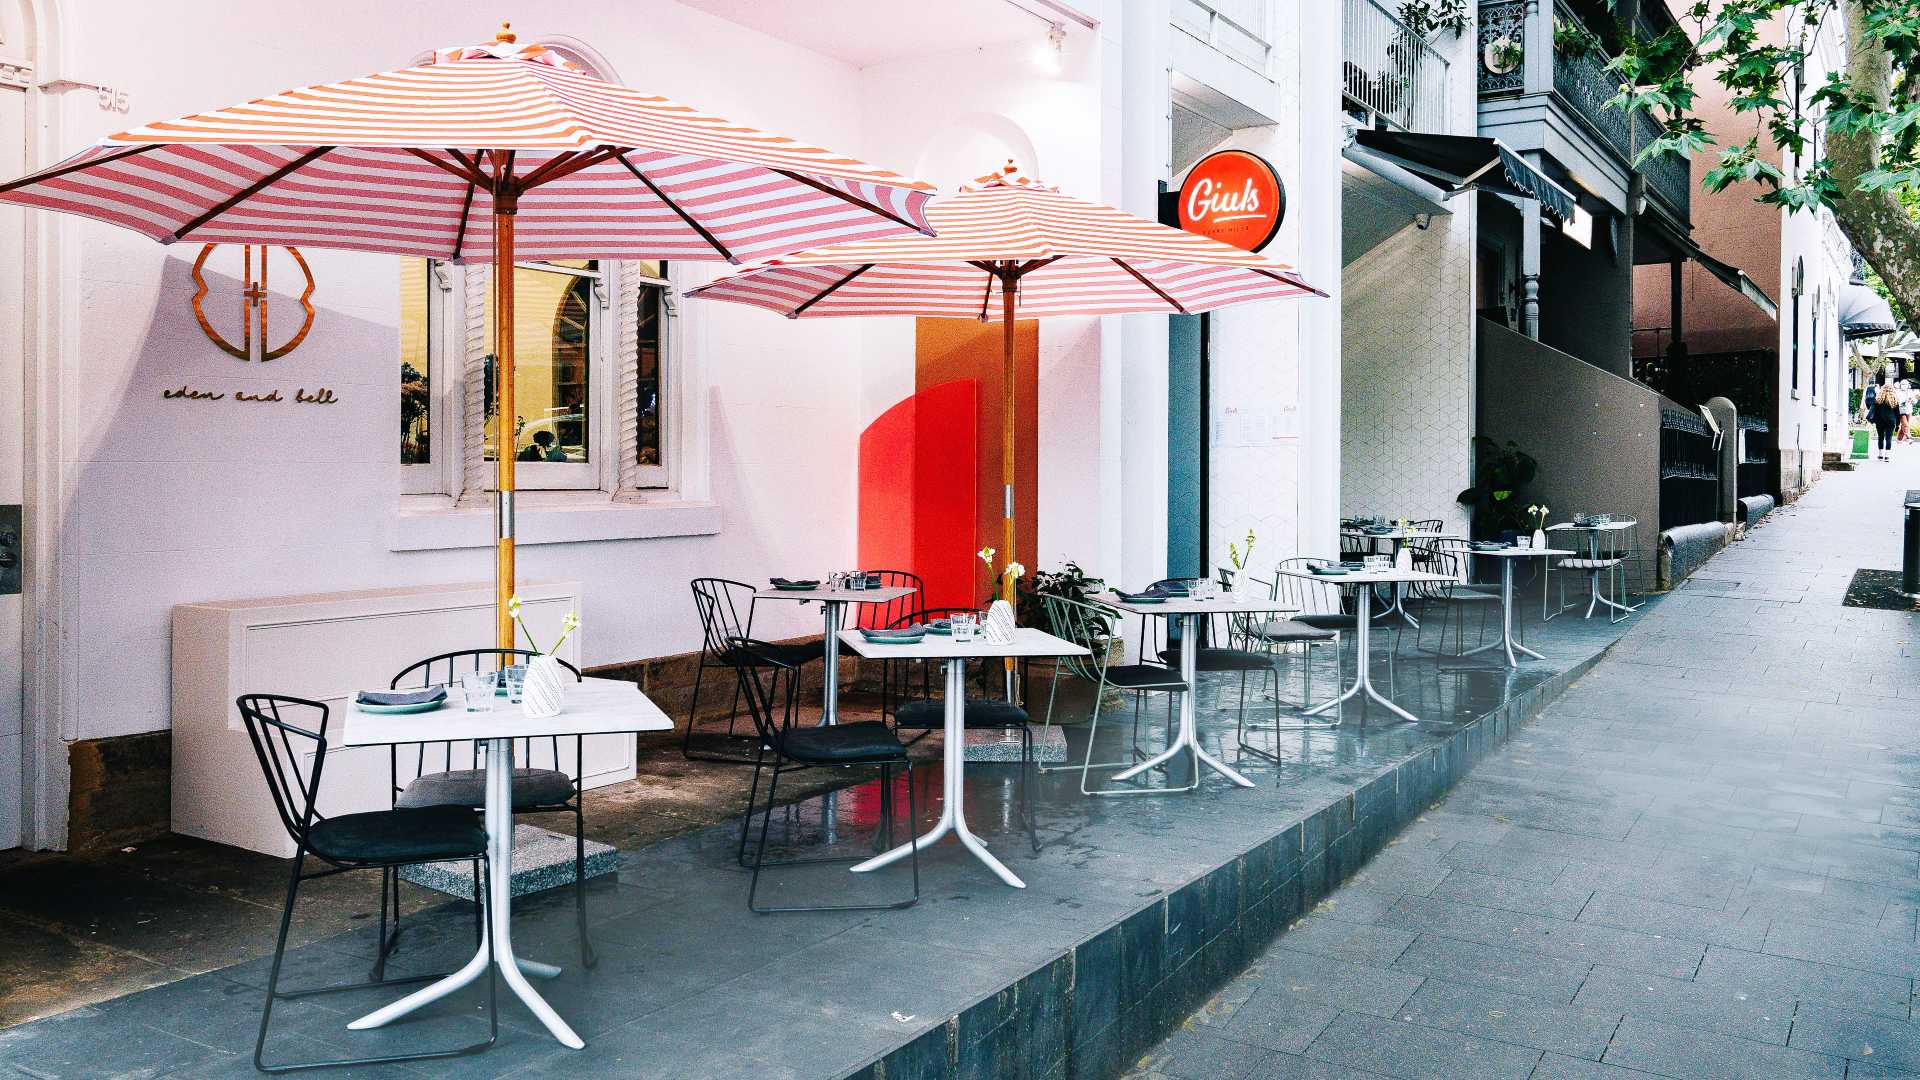 Giuls Is the Newest Italian Restaurant in Surry Hills Boasting Tuscan Cuisine and Al Fresco Dining